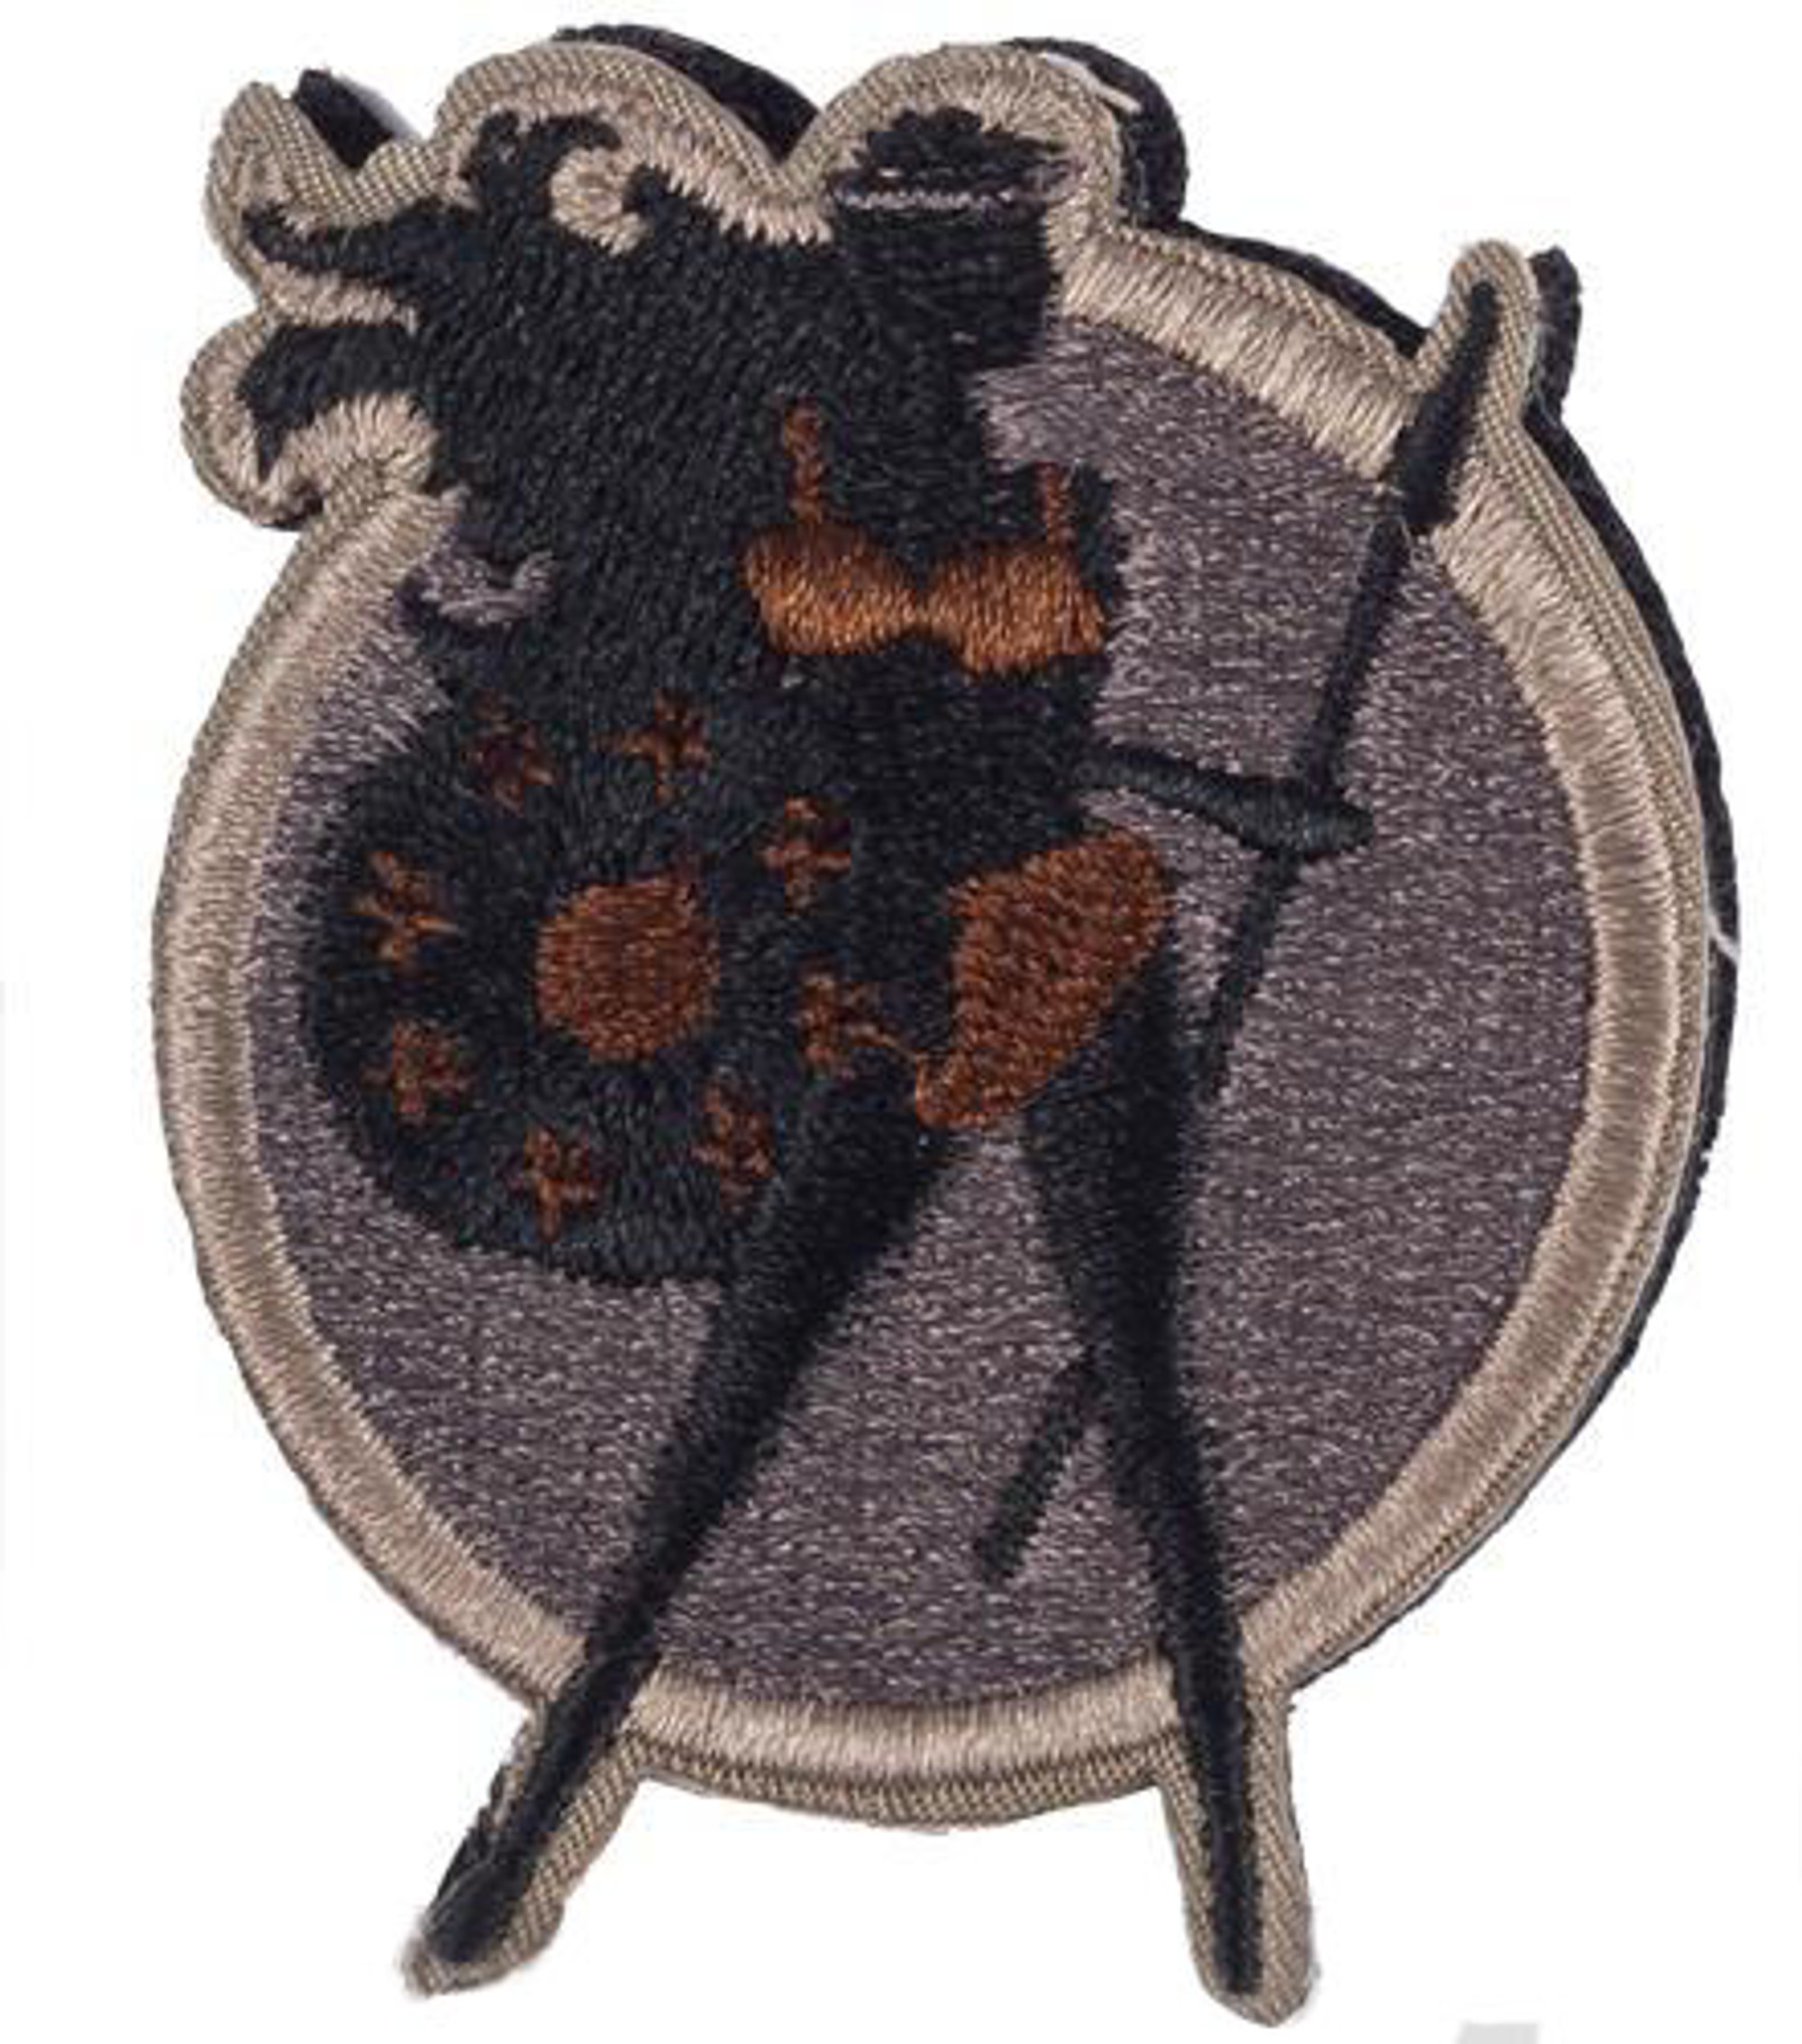 TMC Goddess IFF Hook and Loop Patch - "Army"